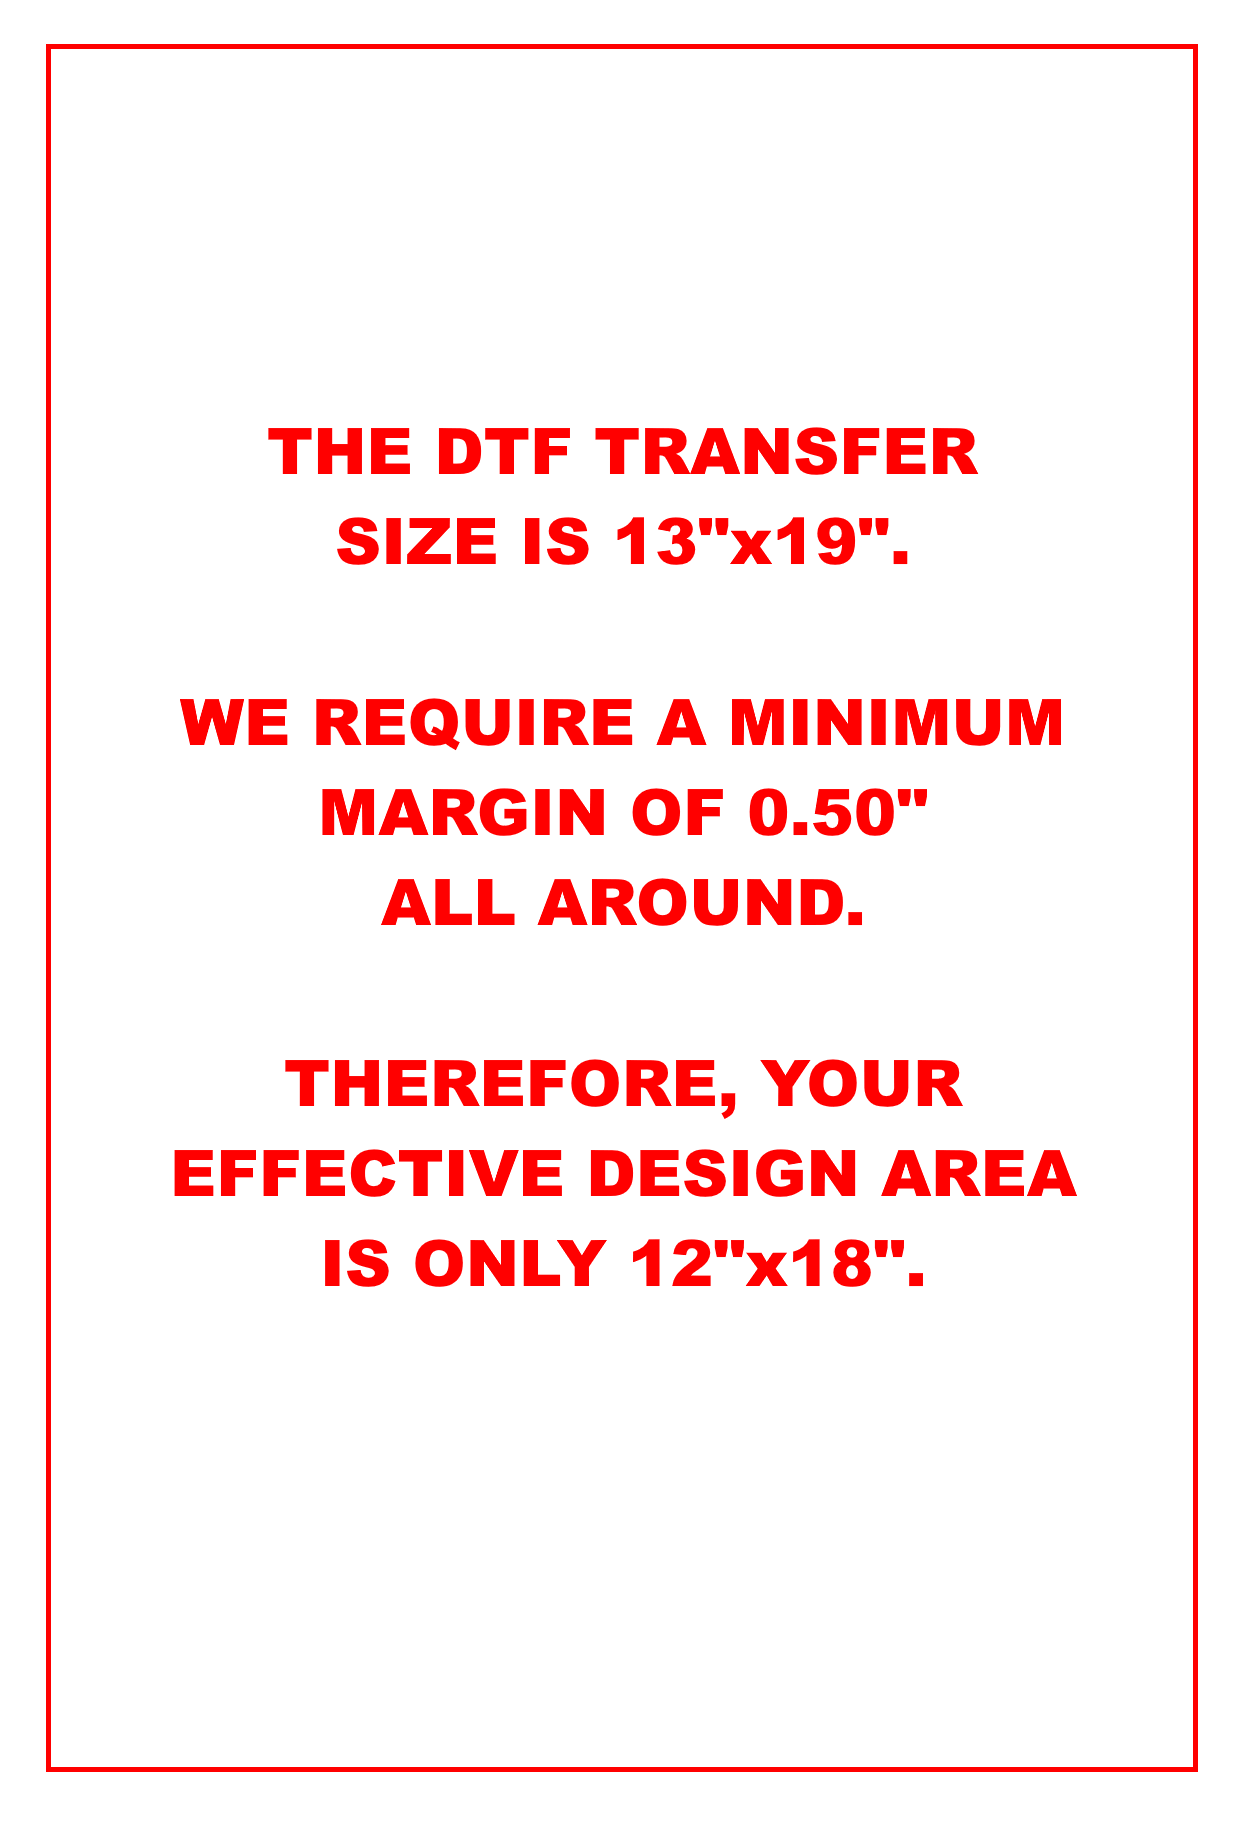 DTF Transfers by Size